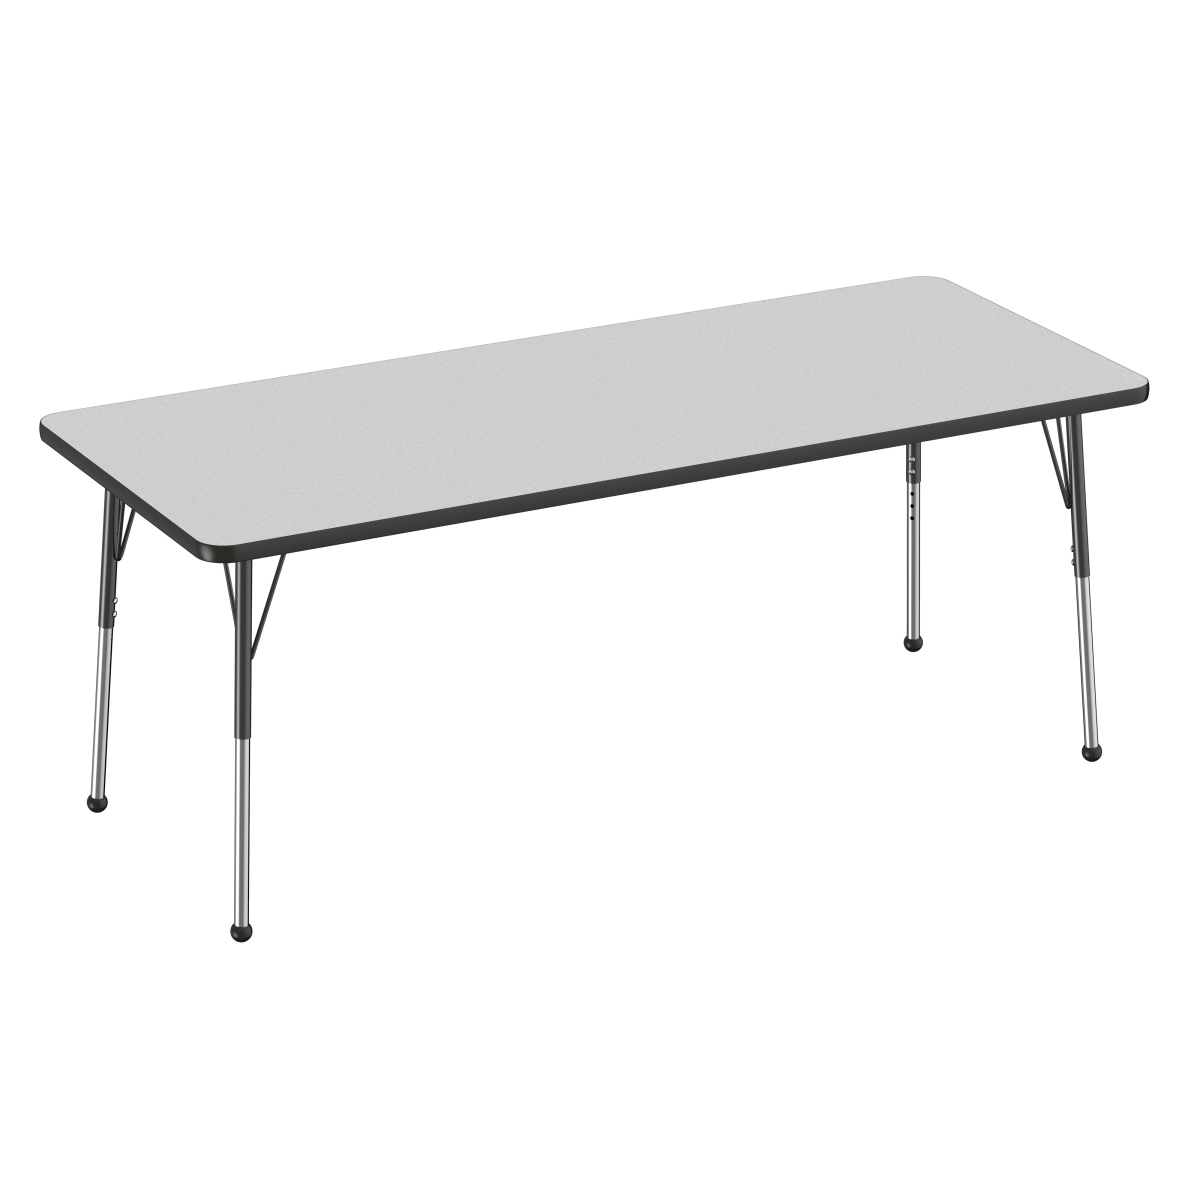 10028-gybk 30 X 72 In. Rectangle T-mold Adjustable Activity Table With Standard Ball - Grey & Black